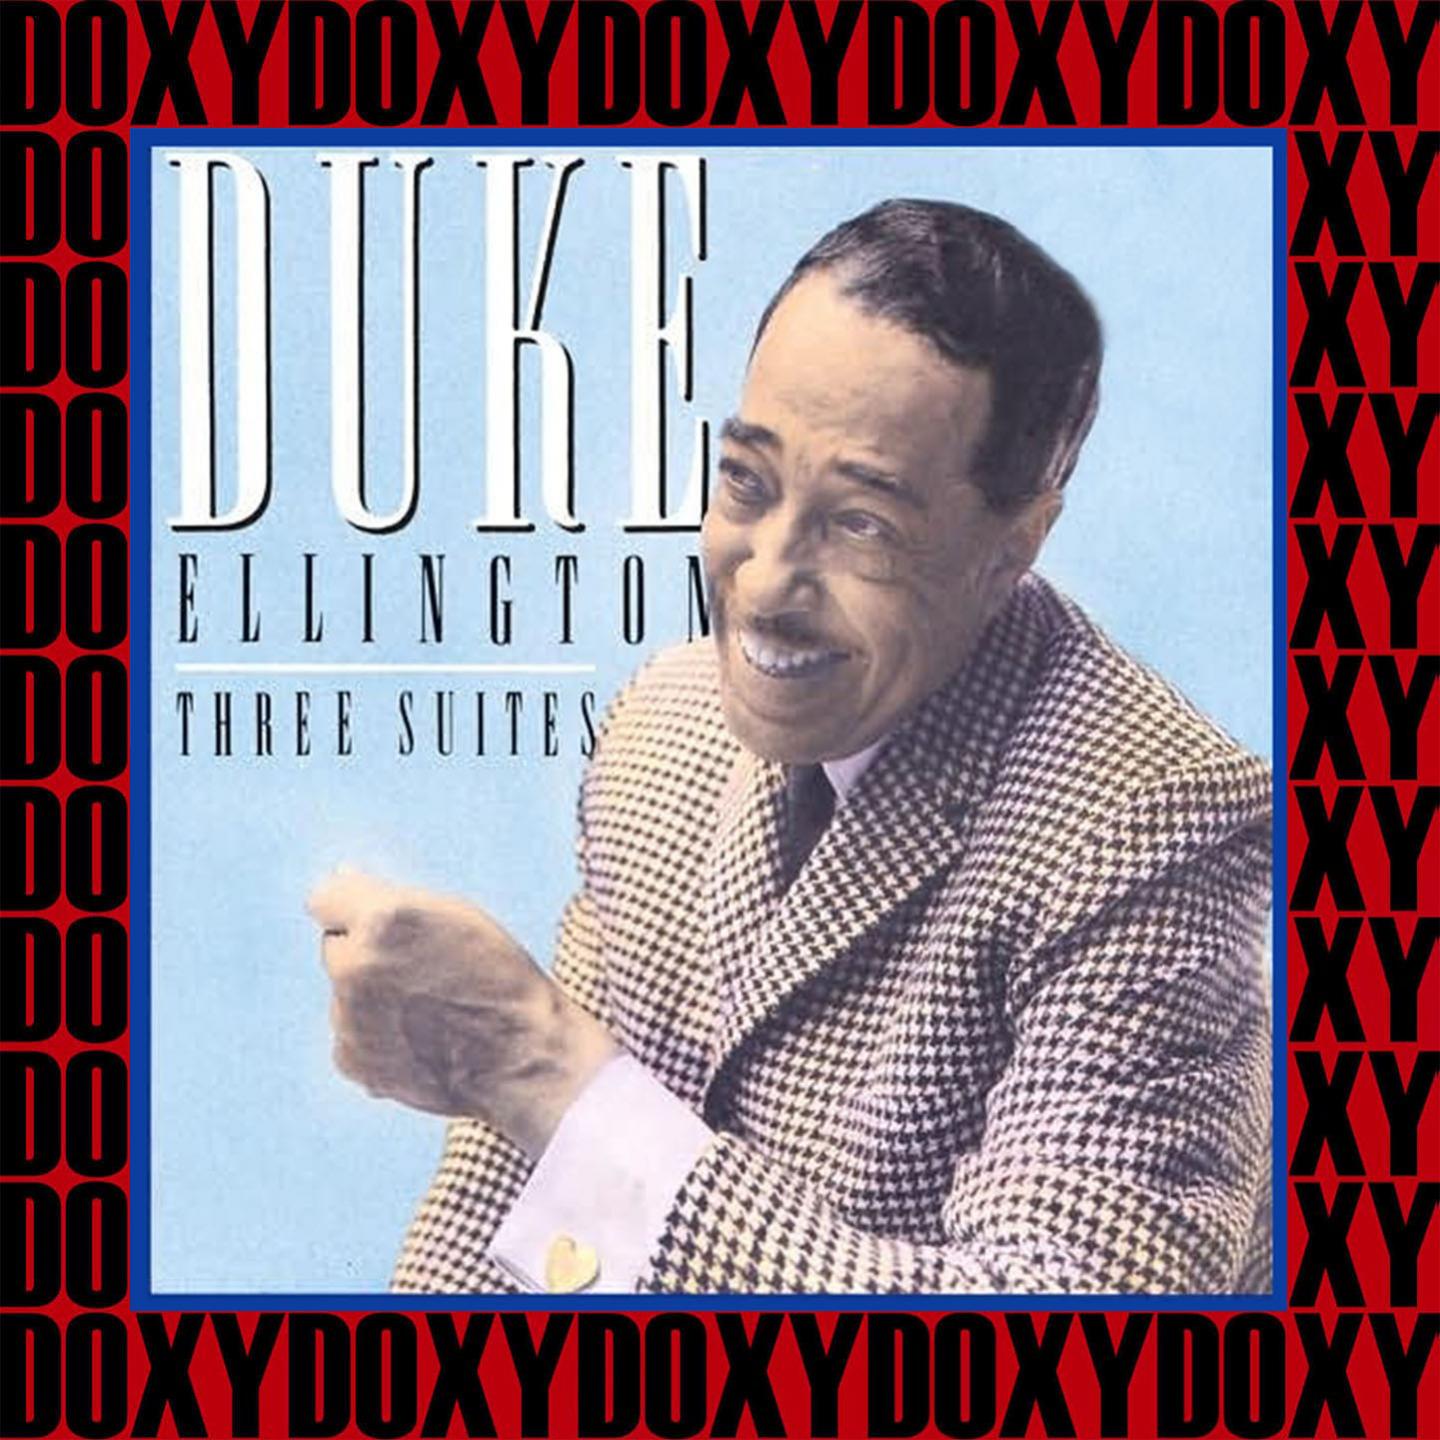 Three Suites (Remastered Version) (Doxy Collection)